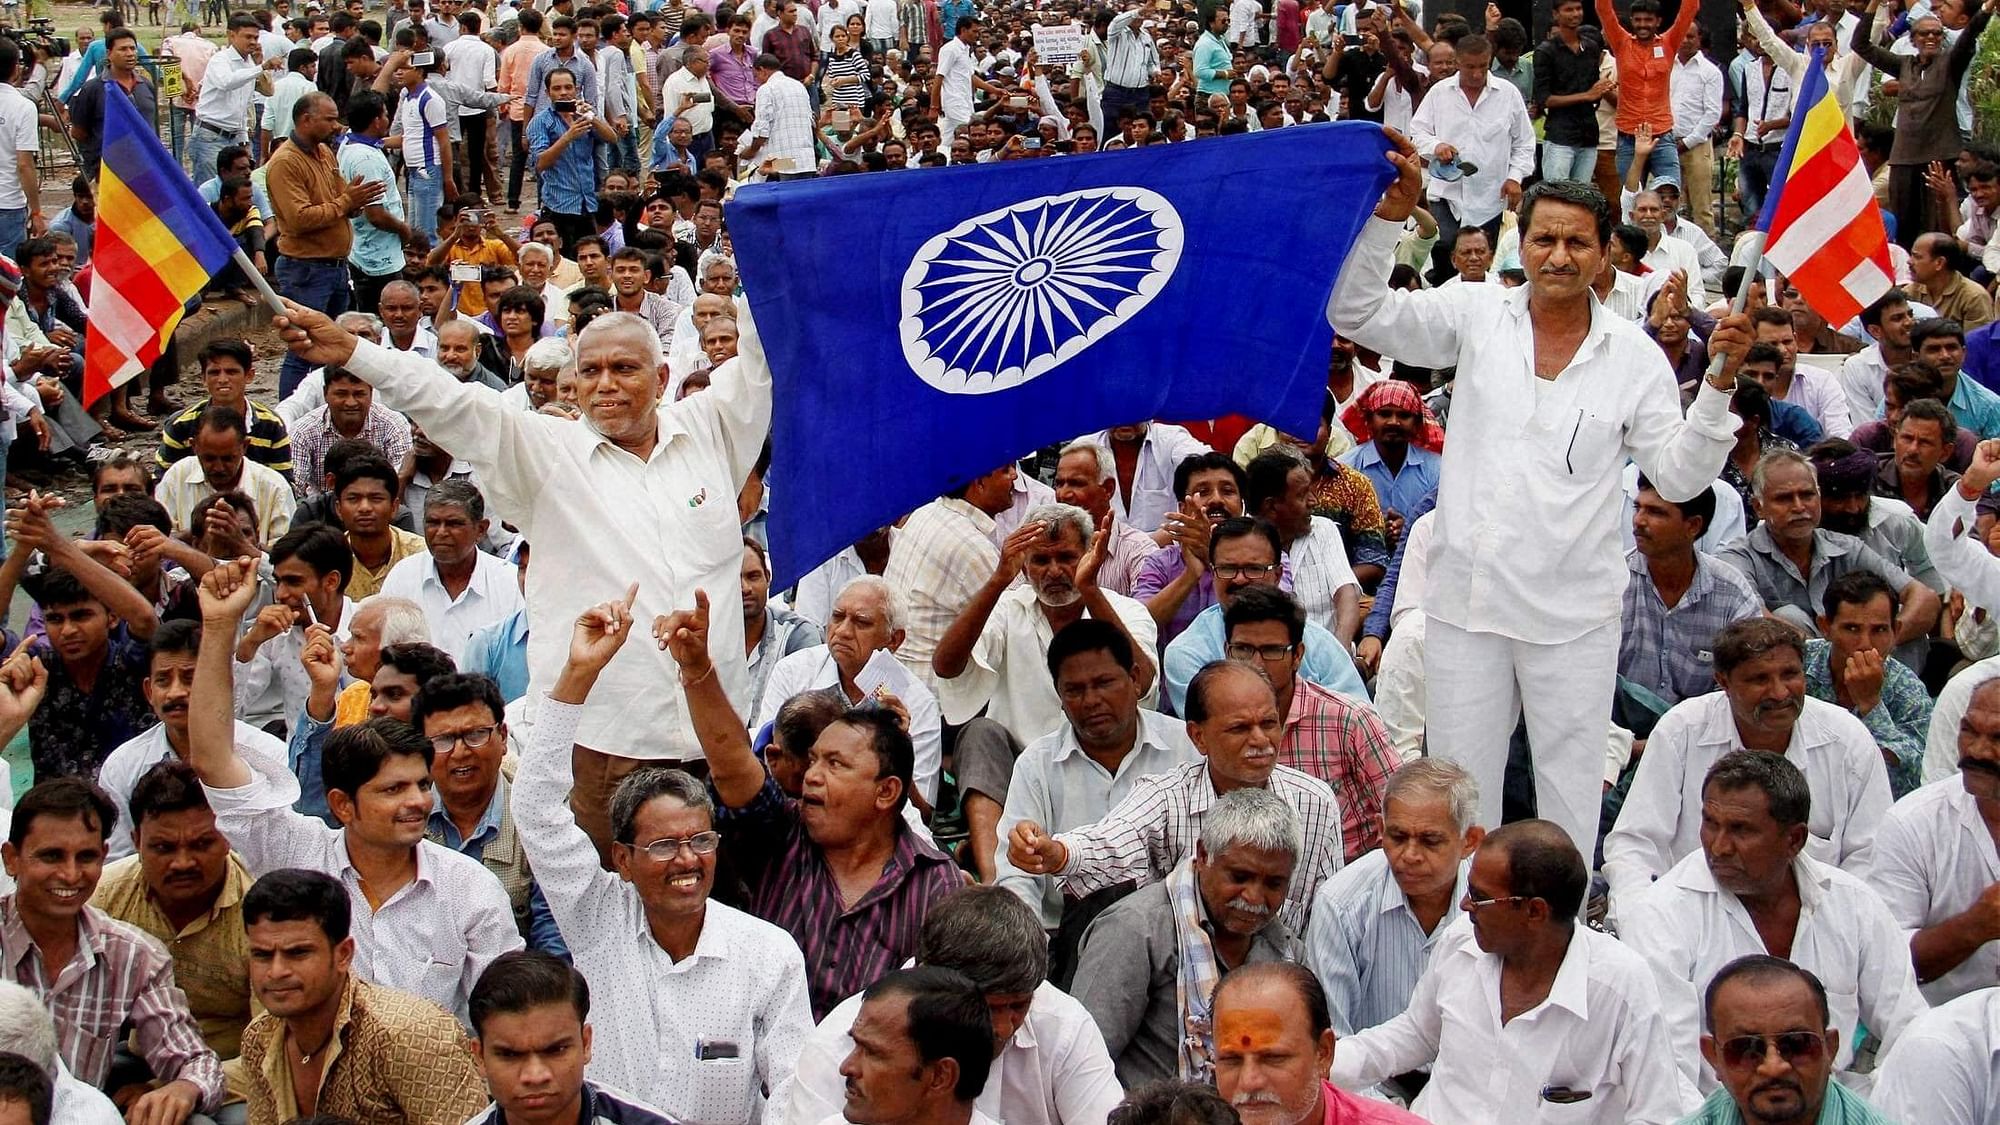 Dalits organised protests against atrocities against the community in Gujarat. (Used for representational purposes).